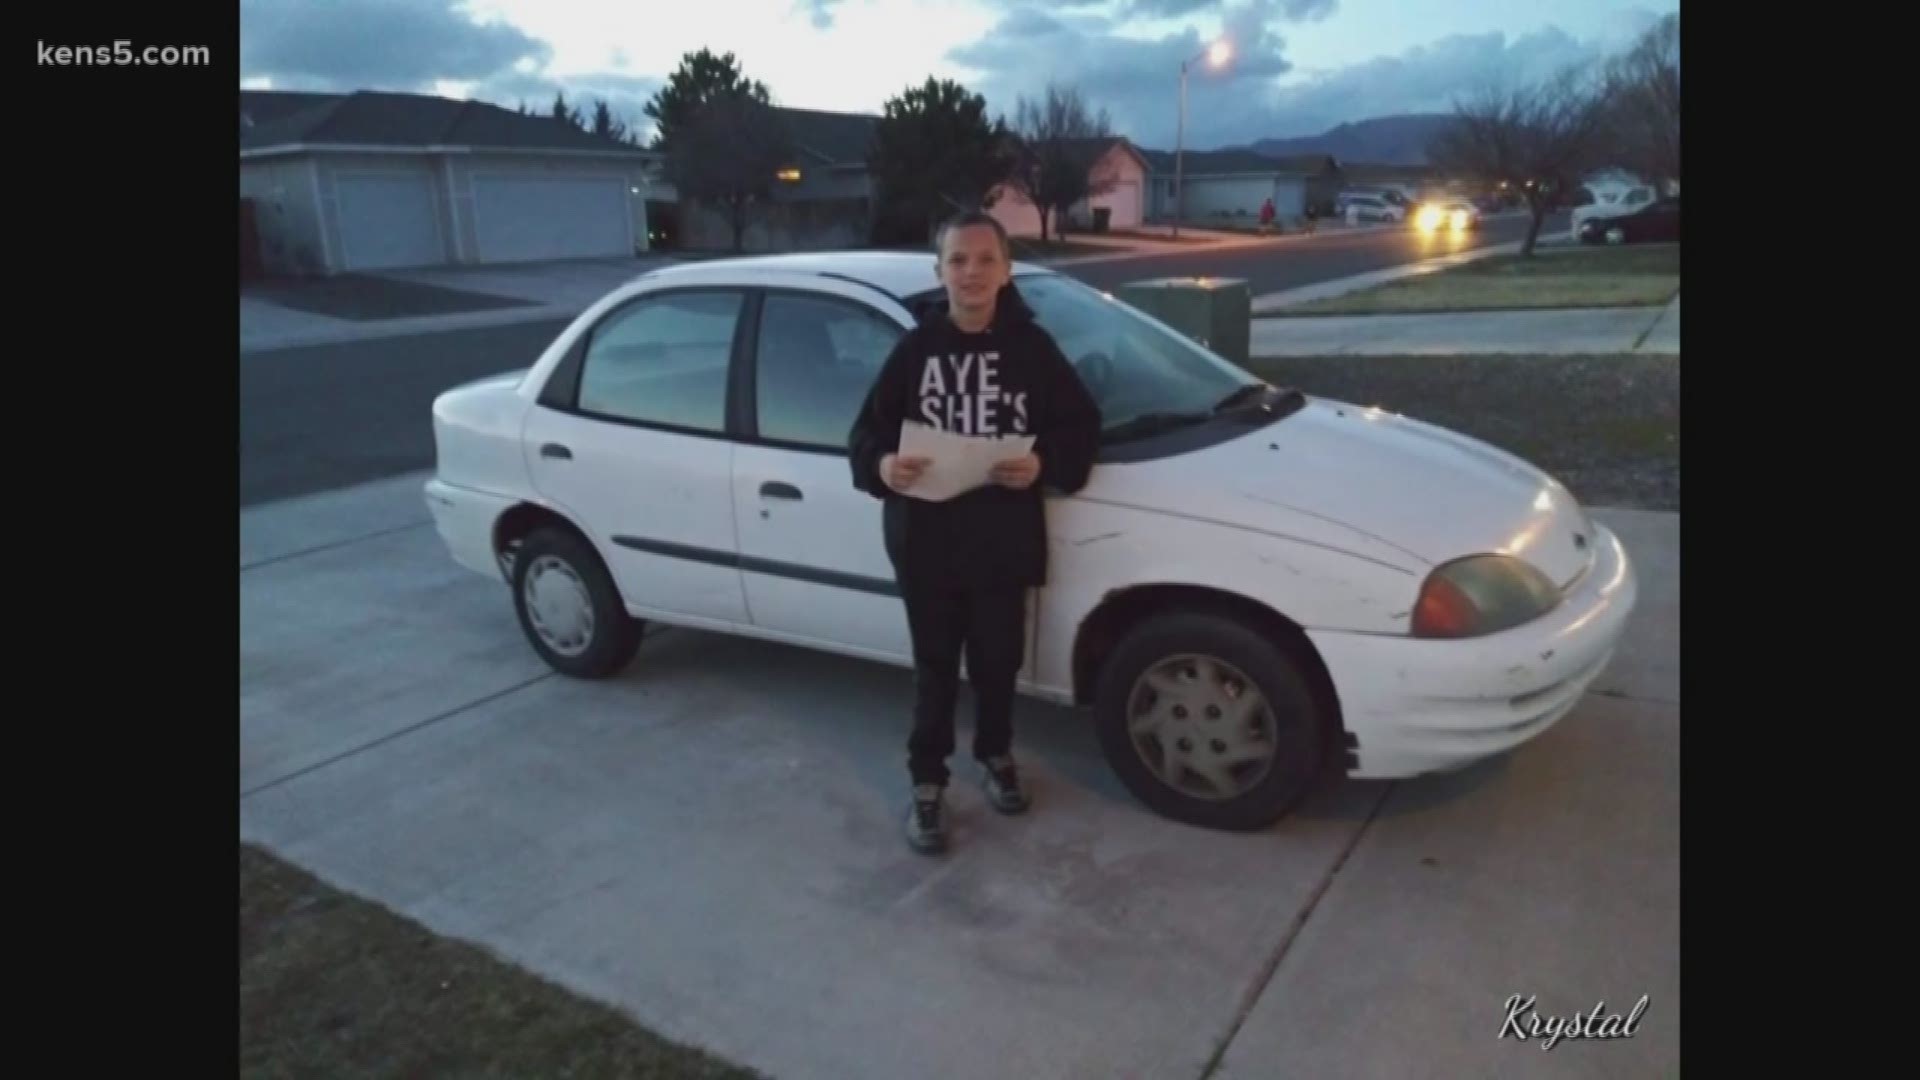 Digital Journalist Nia Wesley tells us more about a Nevada teen who bought his mom a car!